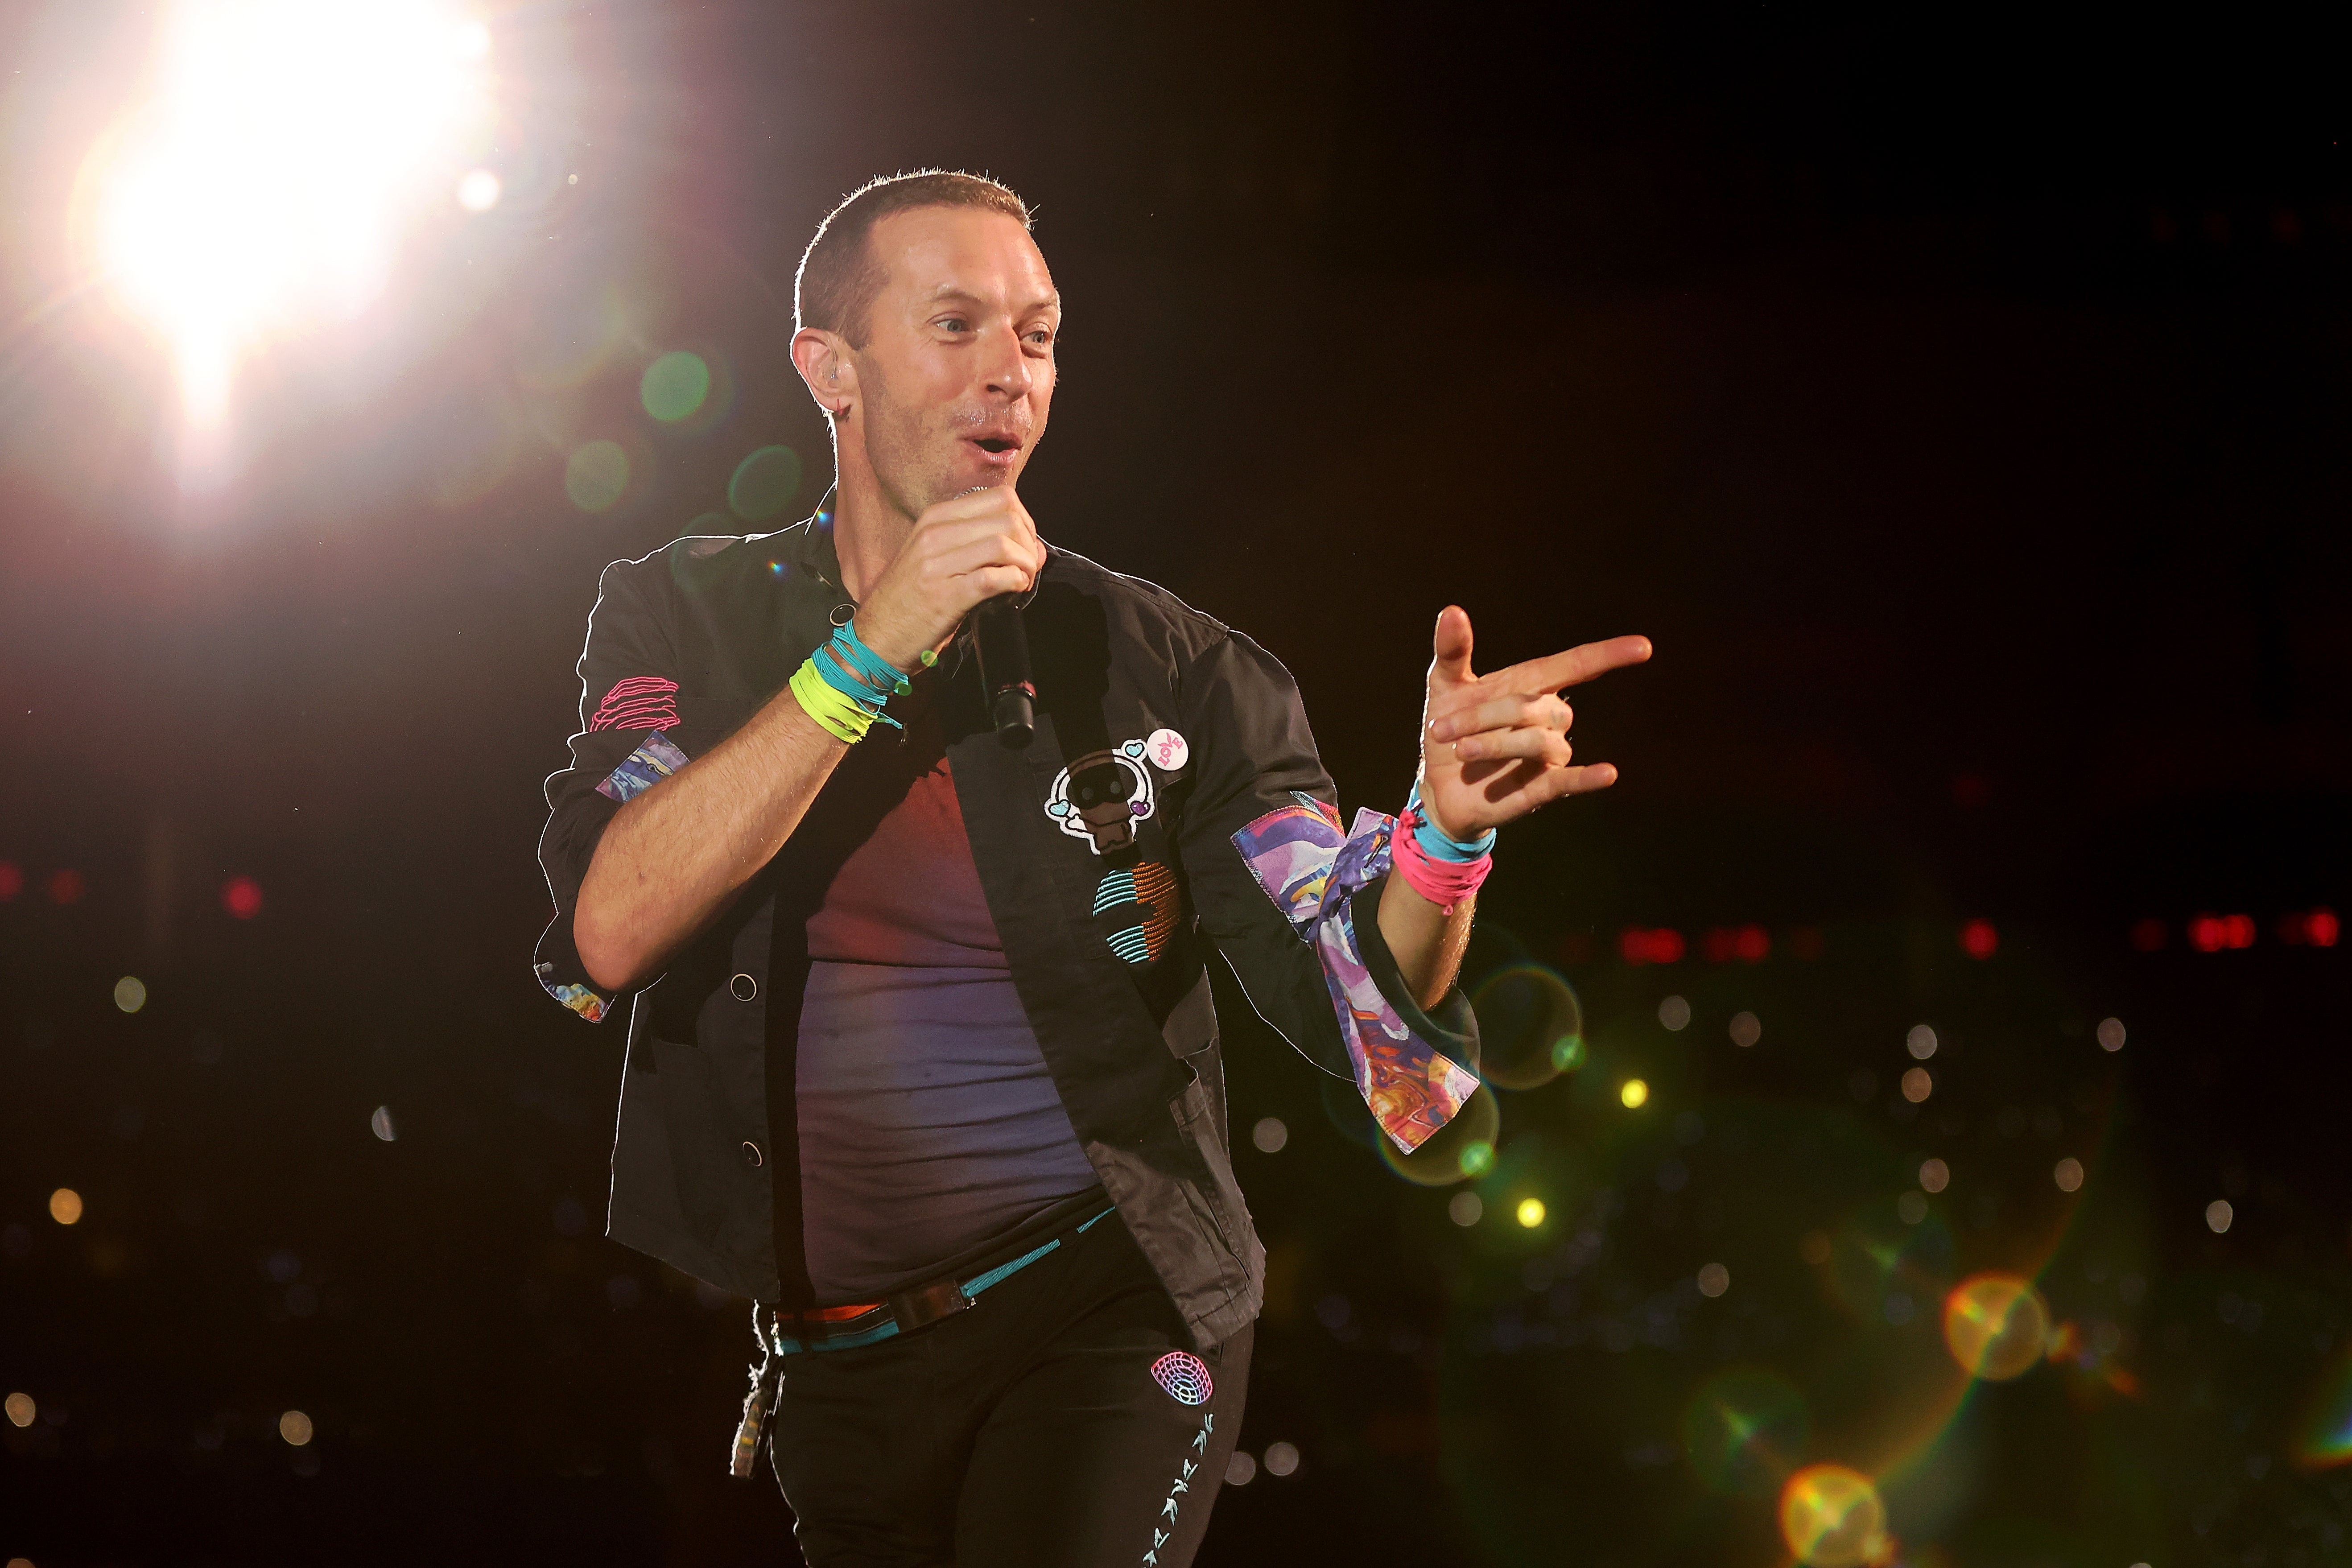 Chris Martin and his band Coldplay are Glastonbury favourites